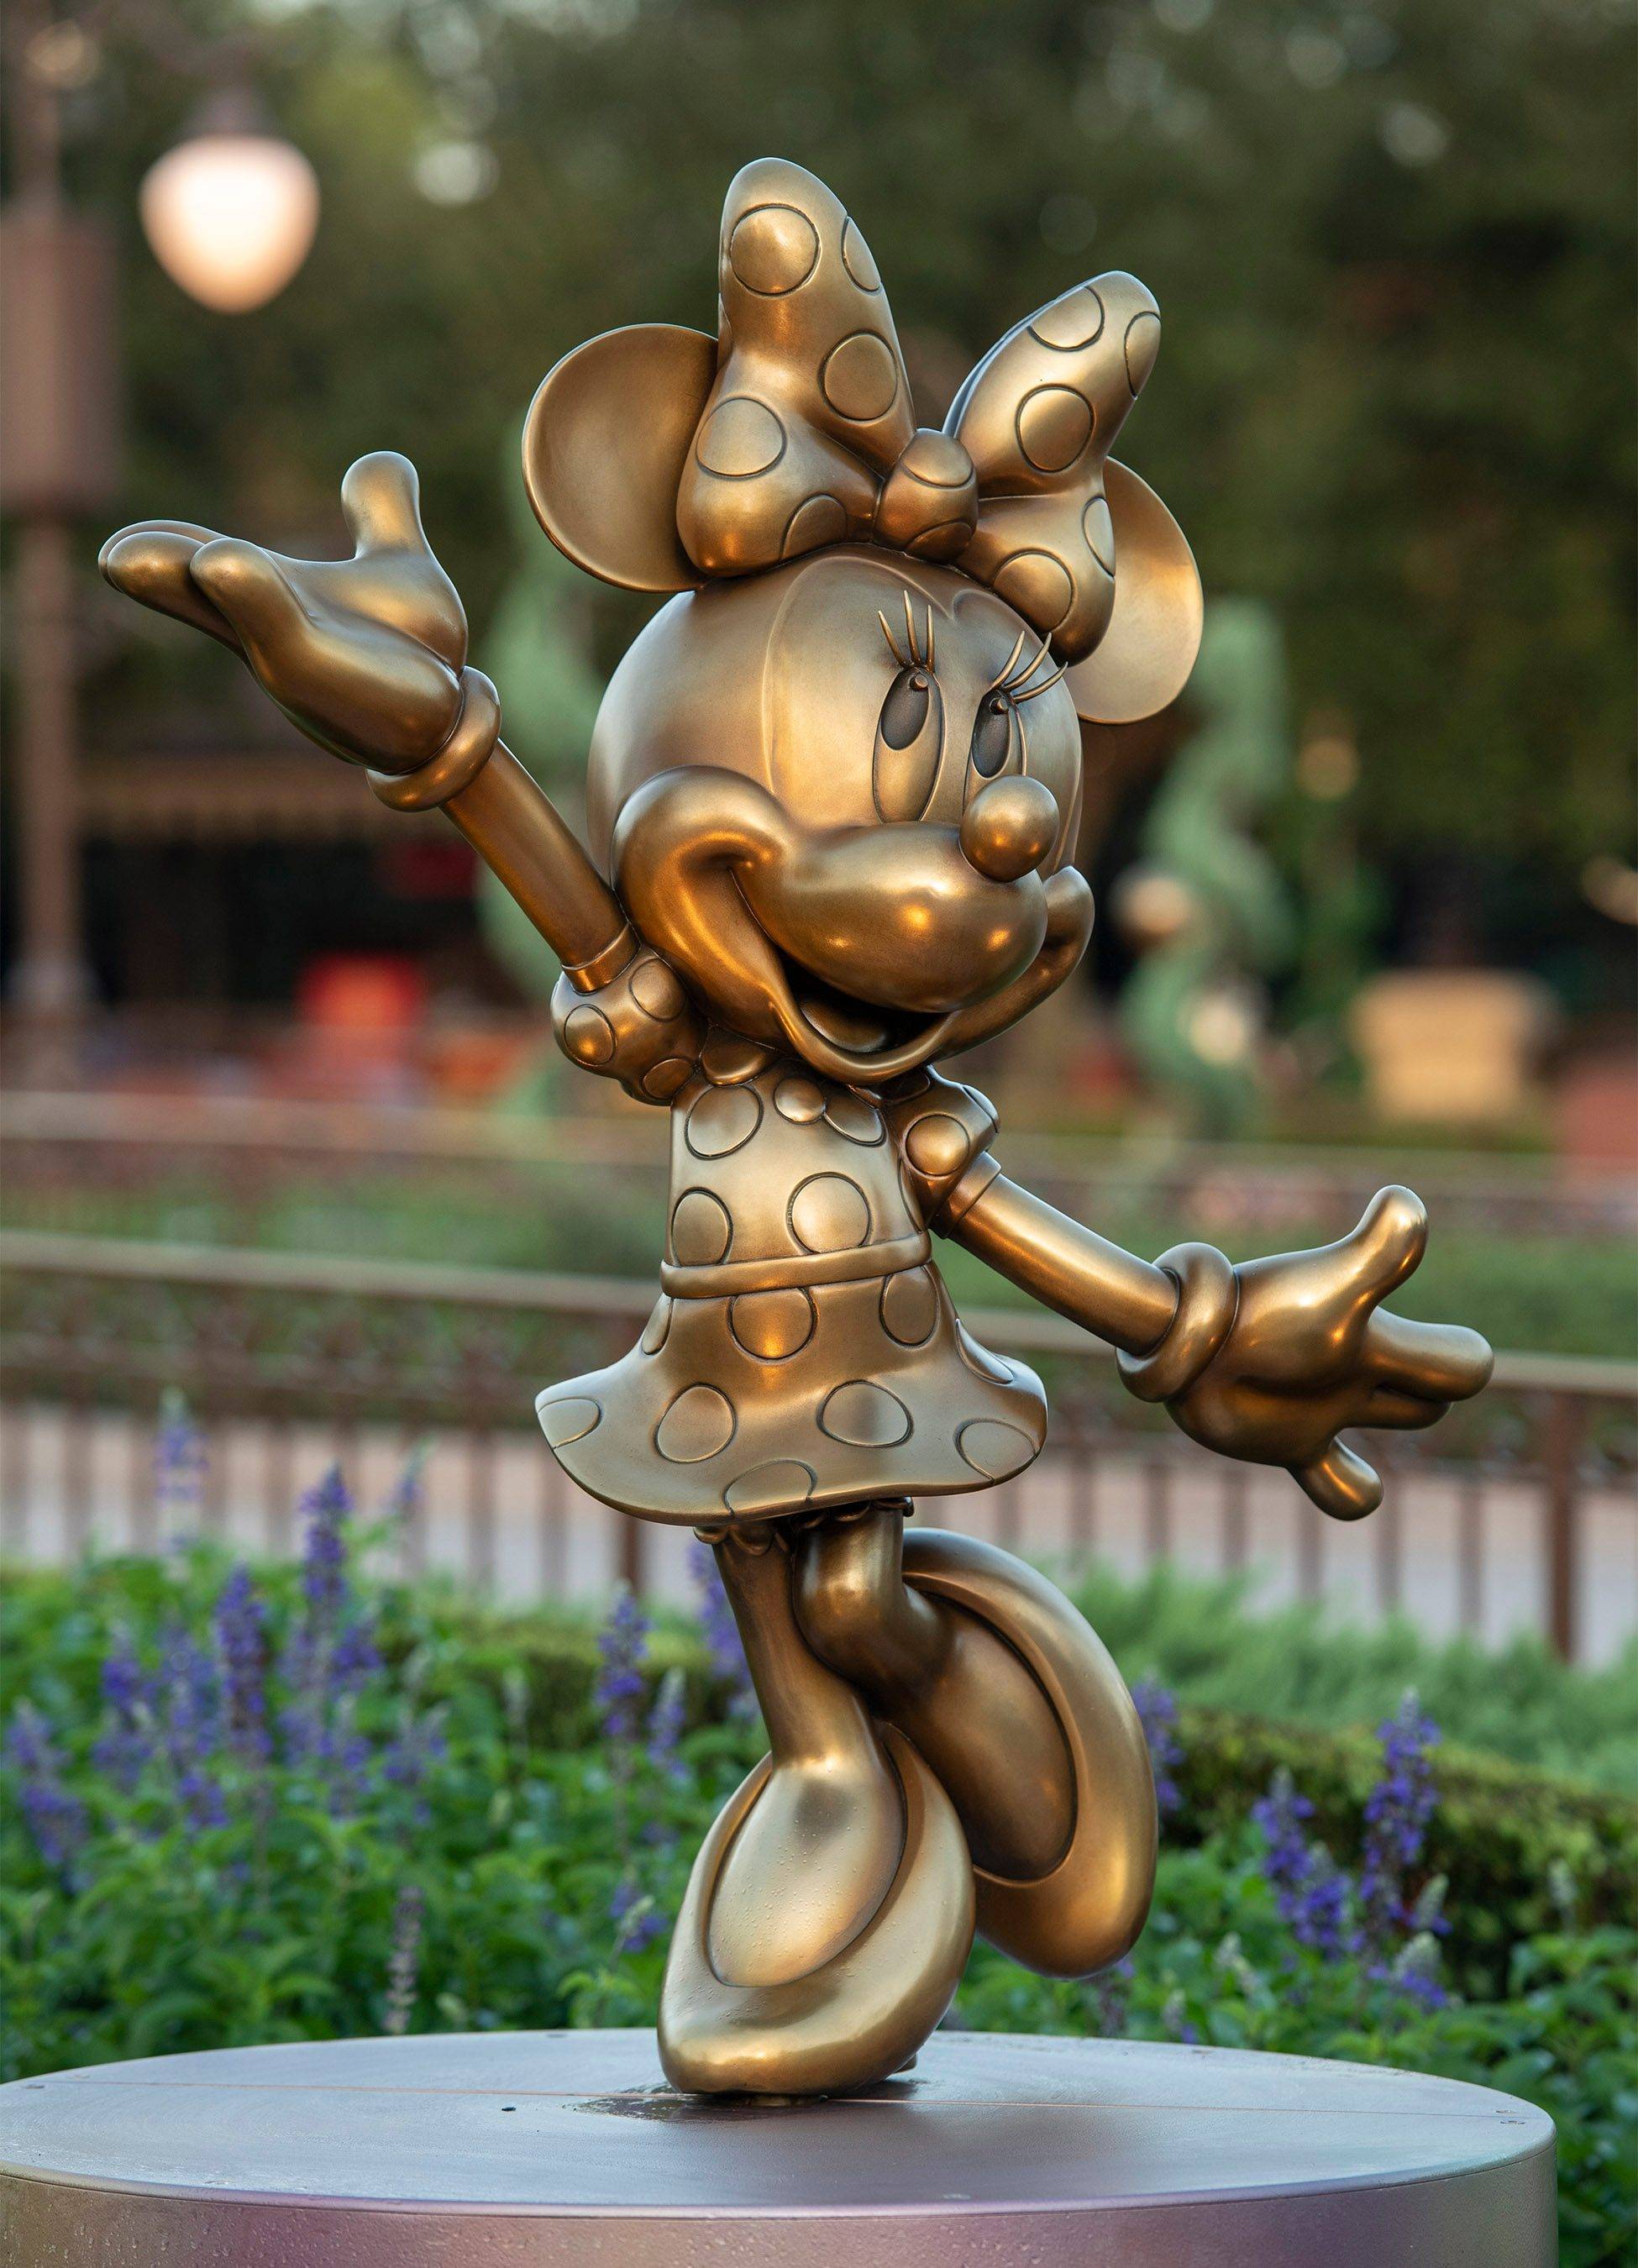 Disney Fab 50 Character collection statue - Minnie Mouse